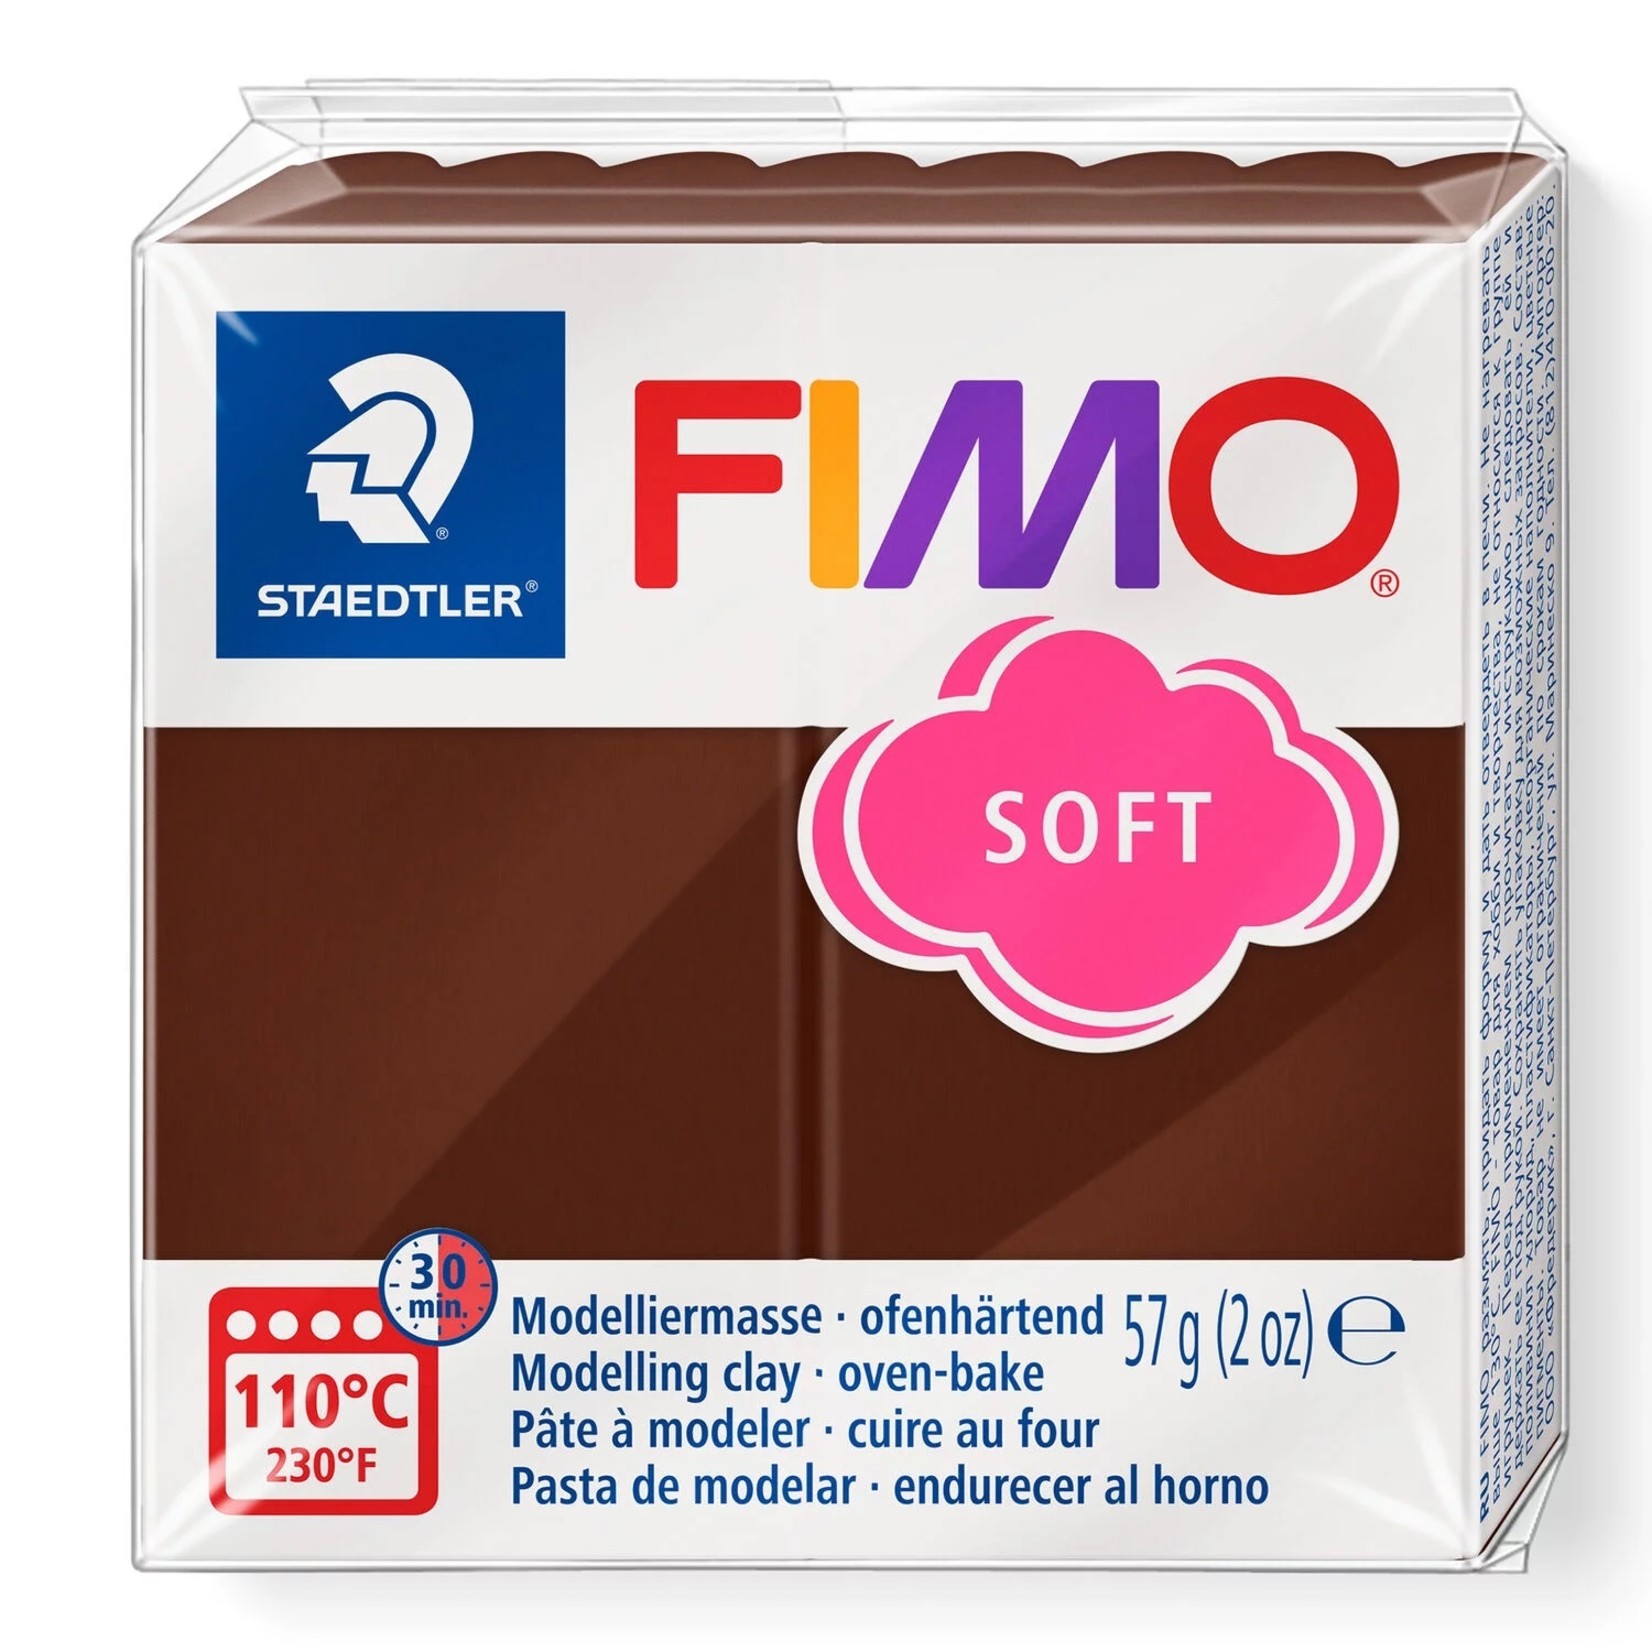 STAEDTLER FIMO SOFT 75 CHOCOLATE